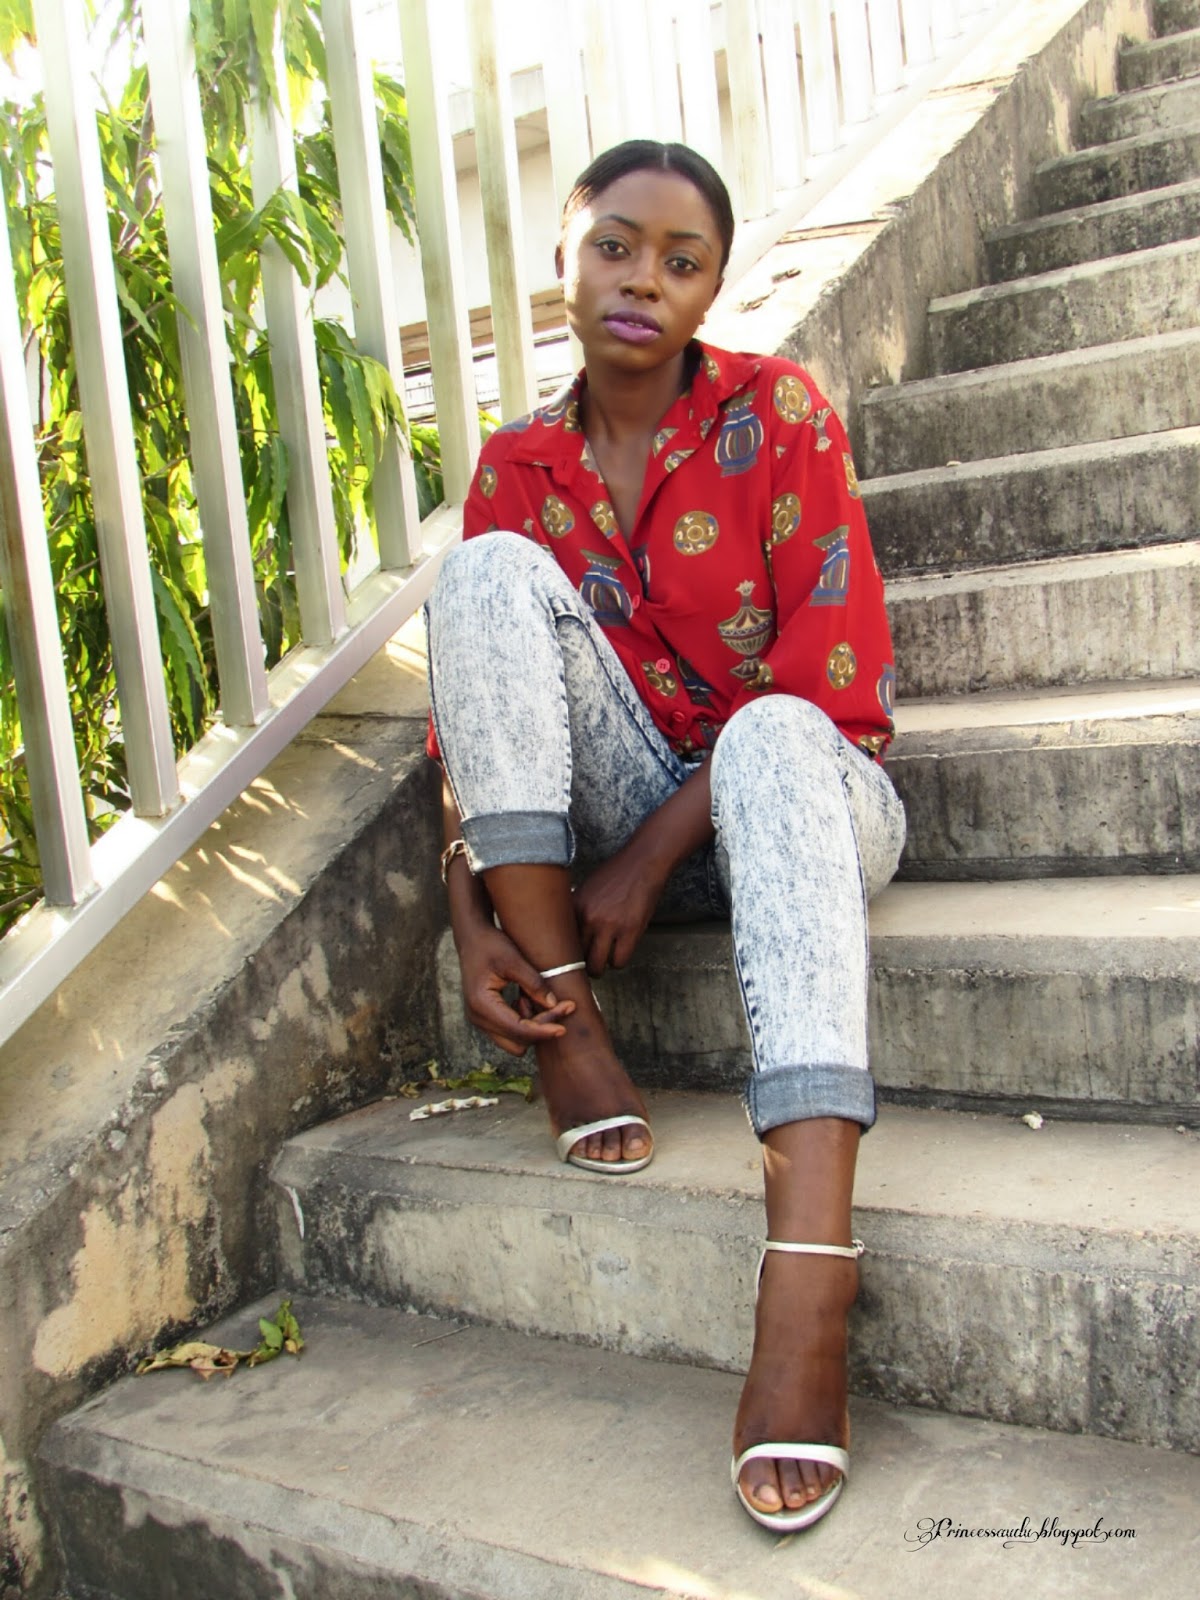 Distressed jeans,  how to style a vintage shirt